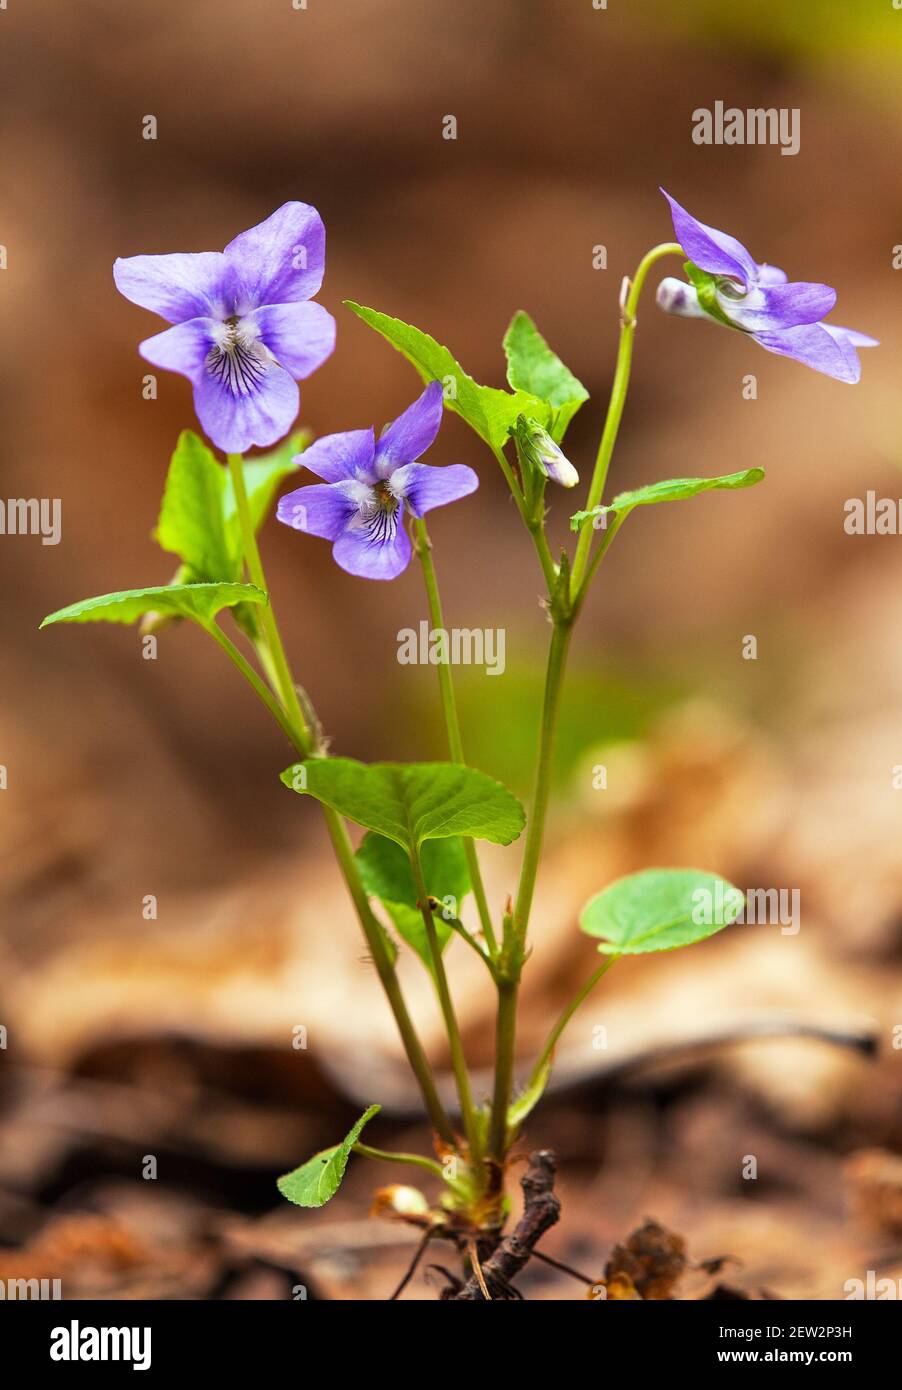 Viola Riviniana, flowering plant the common dog-violet. It is also called wood violet or dog violet flower Stock Photo